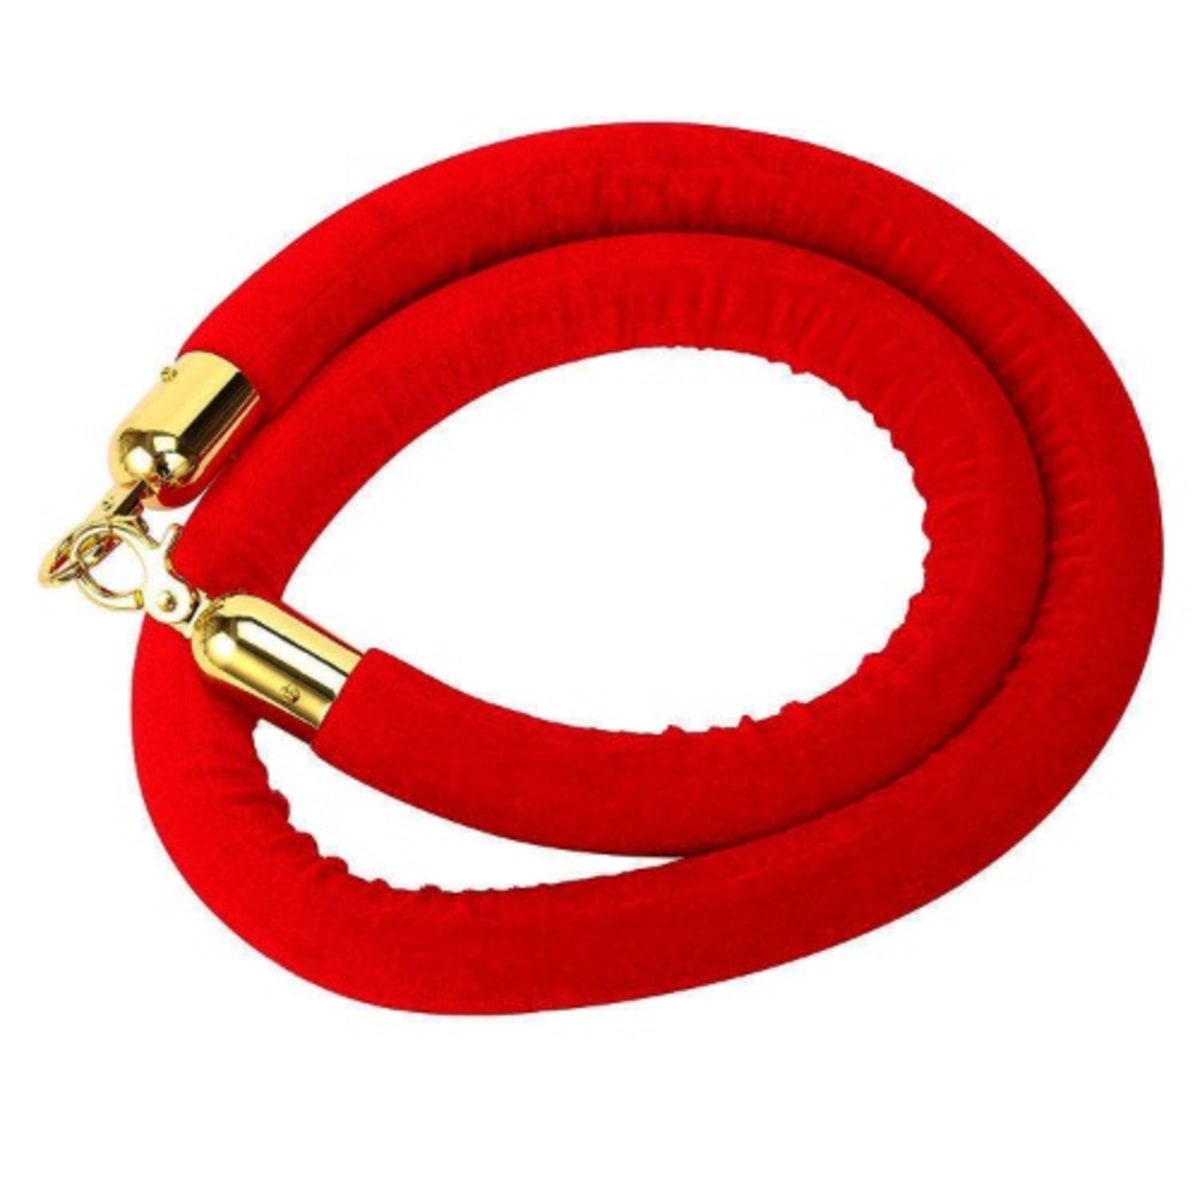 Unic Velvet Barrier Crowd Control Stanchion Rope Gold Polished Hooks Red